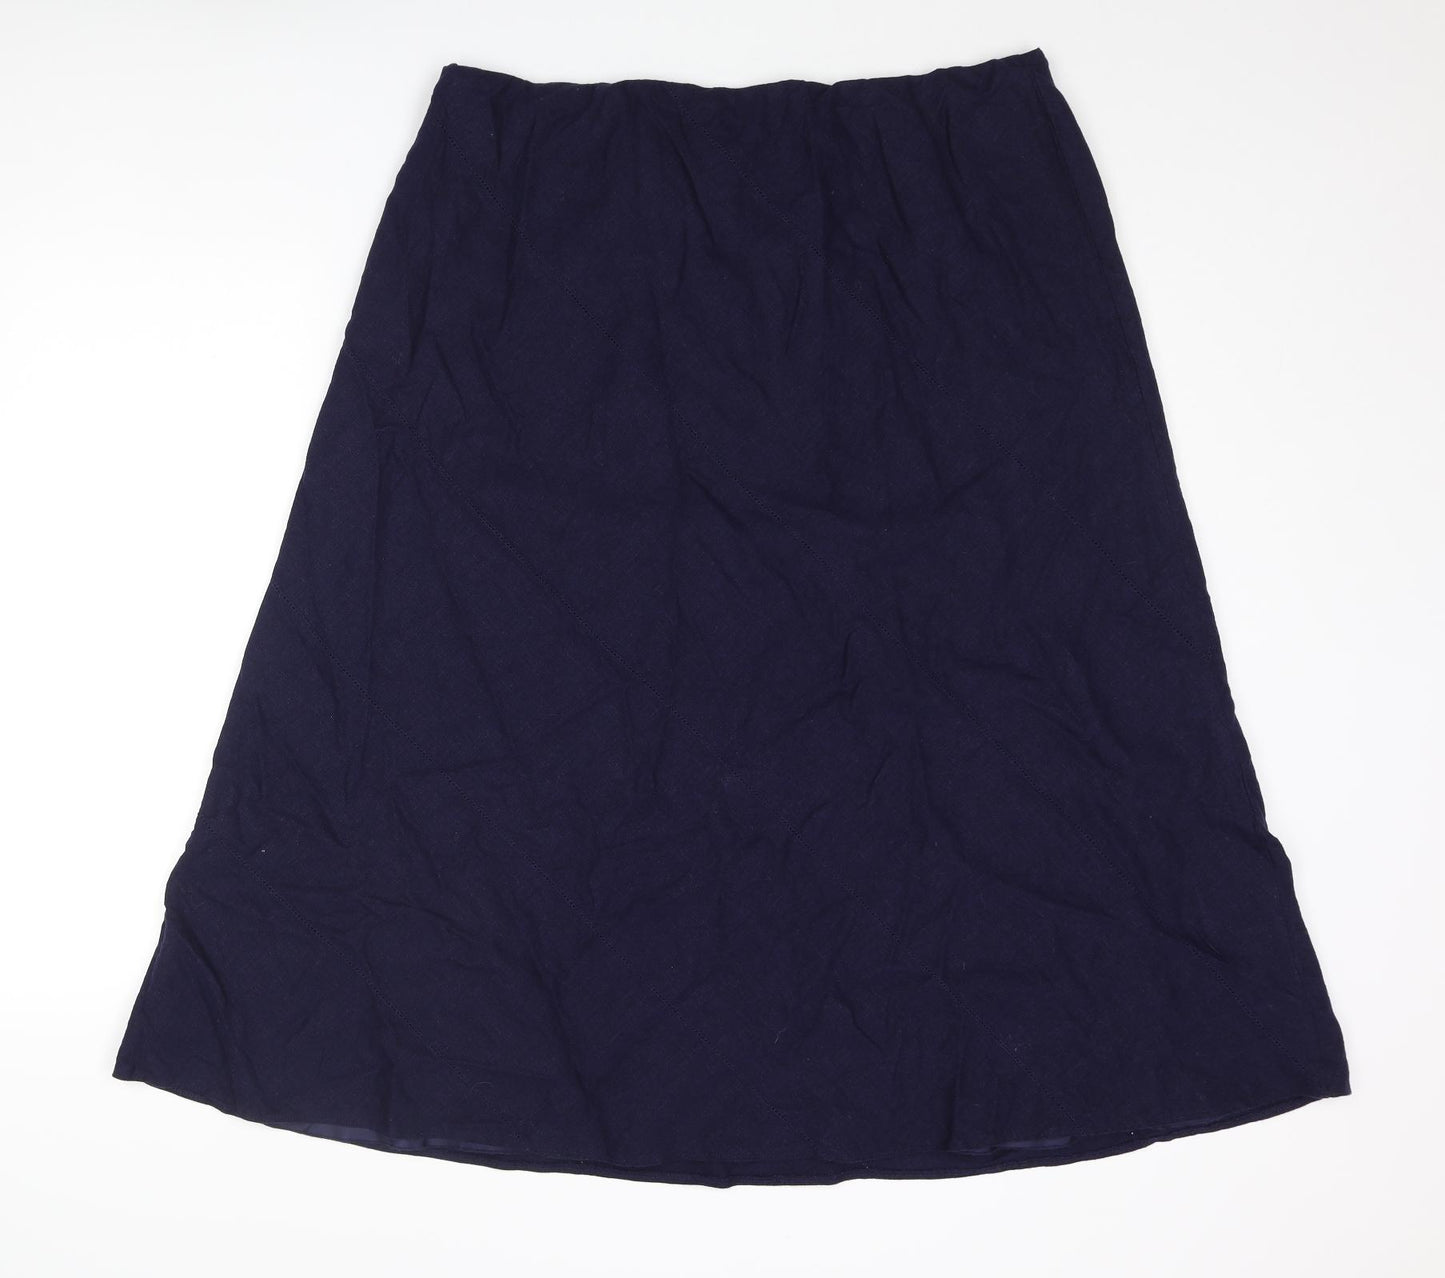 Marks and Spencer Womens Blue Linen A-Line Skirt Size 18